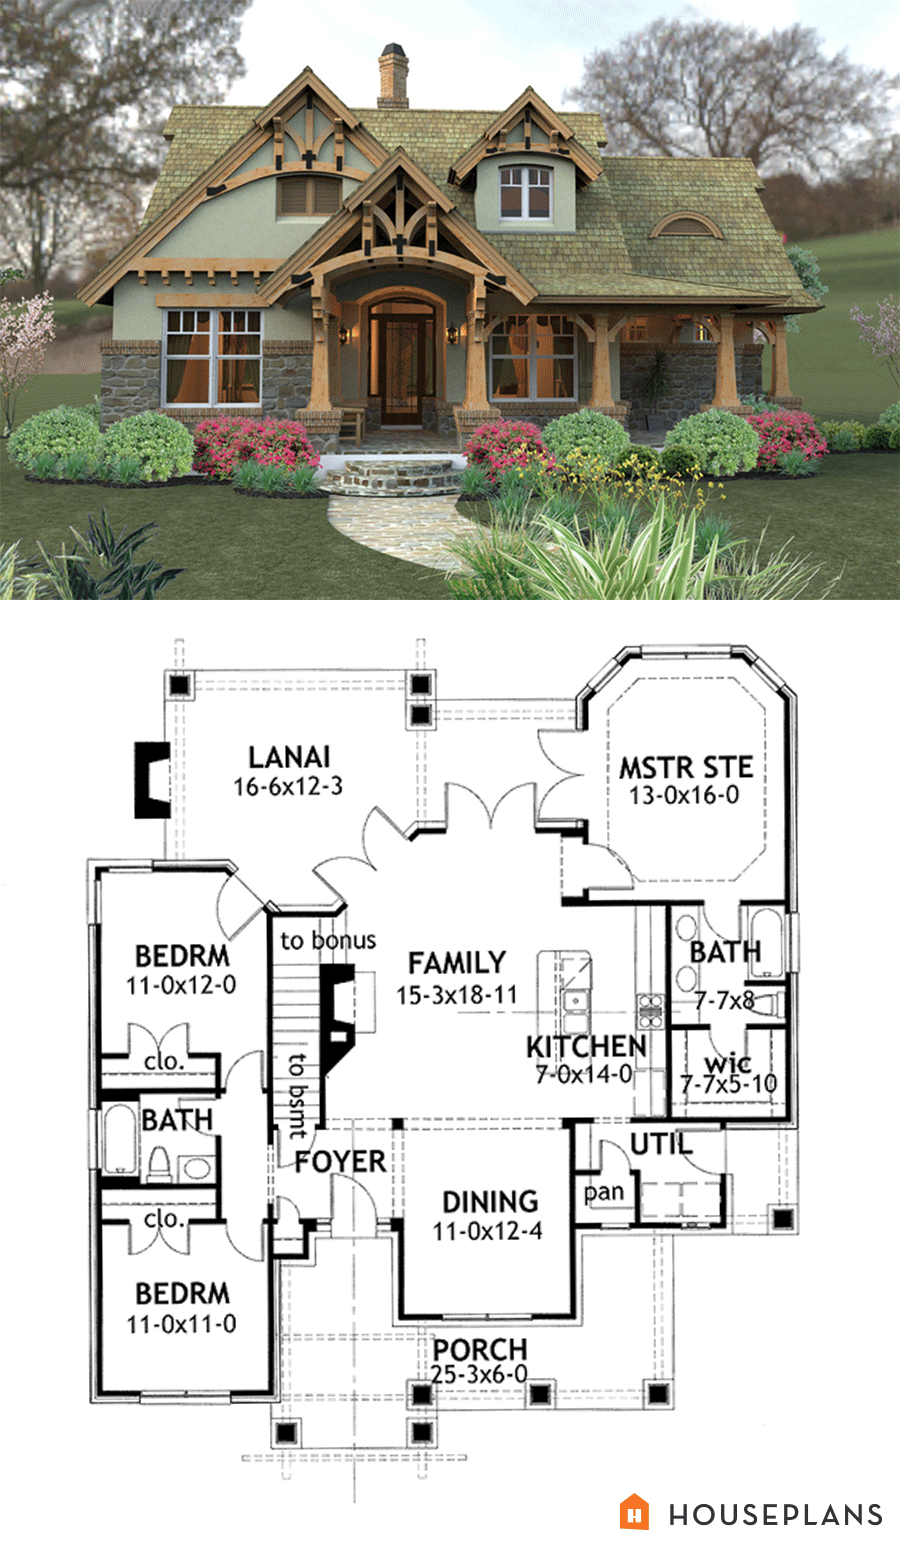 A small house plan with an open floor plan and a garage.